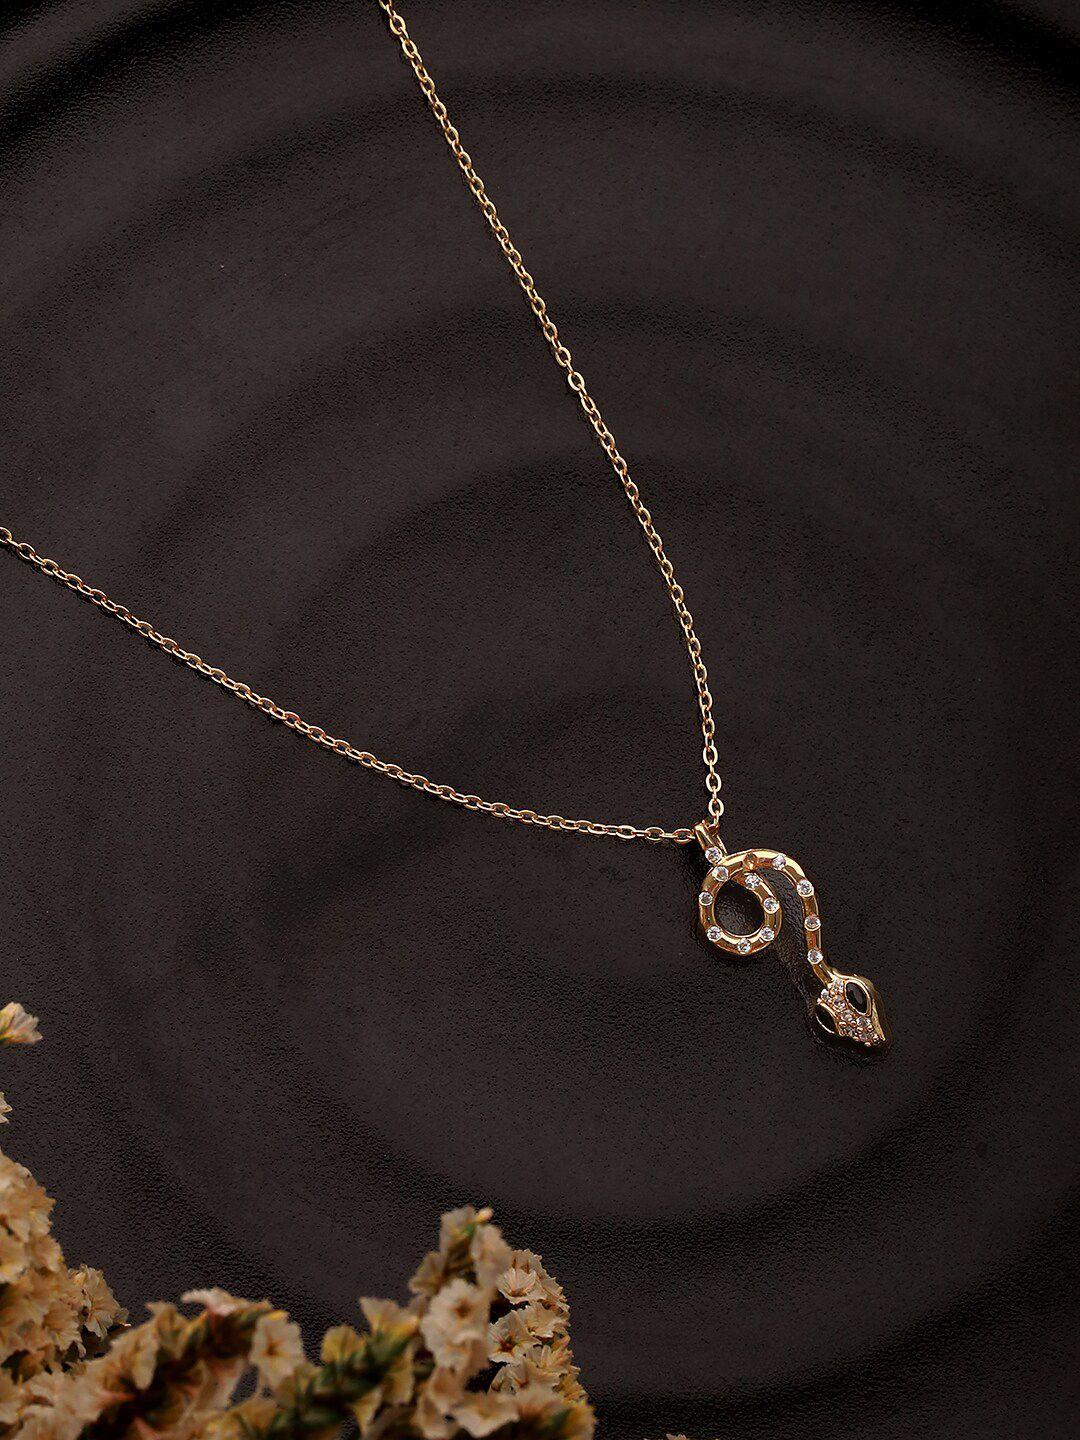 jazz-and-sizzle-rose-gold-plated-cz-studded-snake-pendant-with-chain